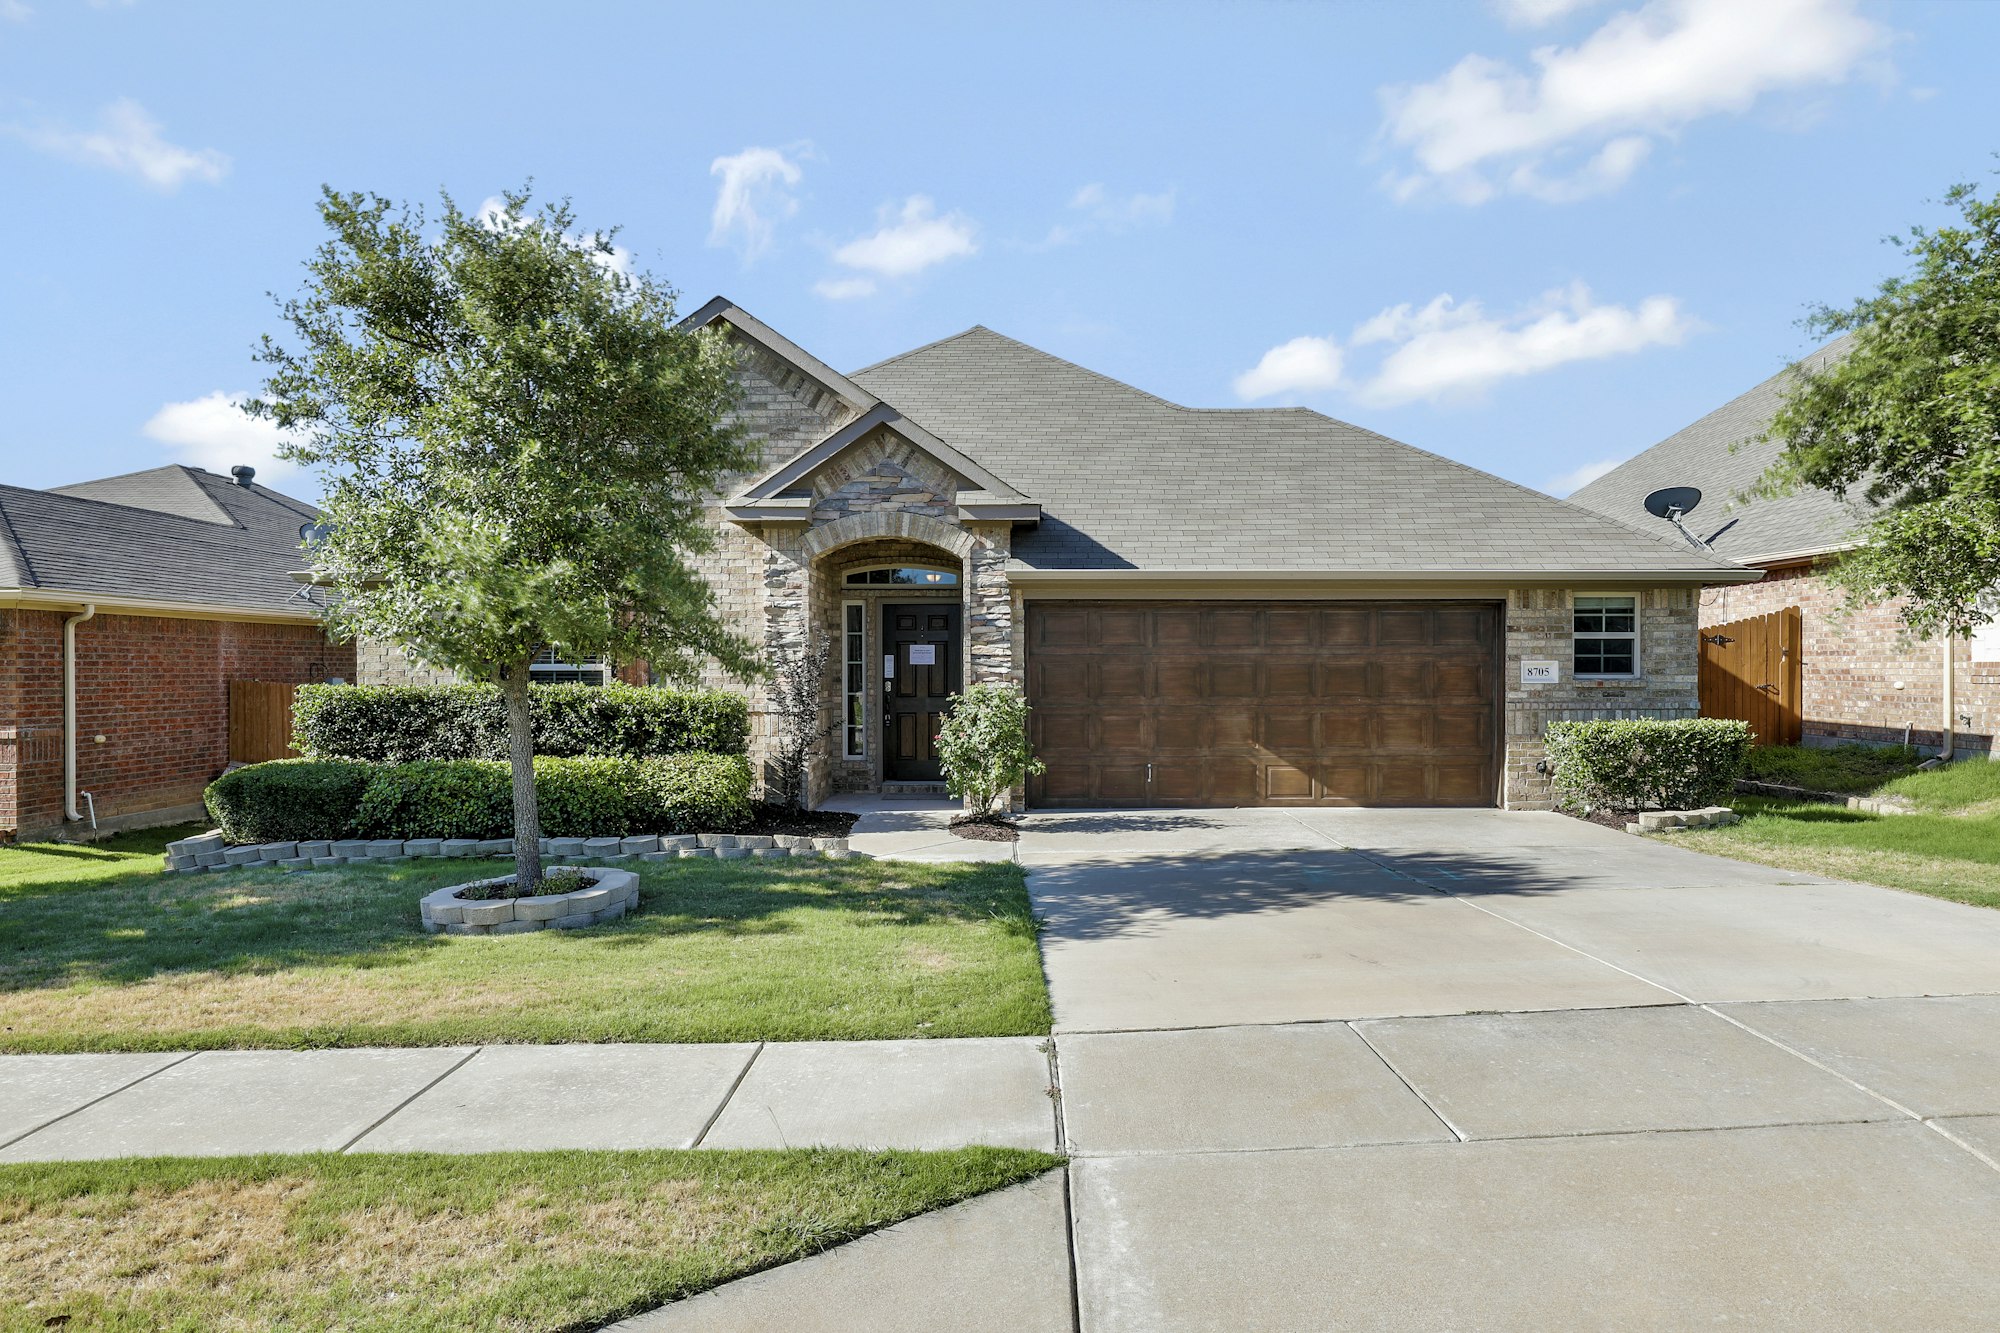 Photo 1 of 25 - 8705 Vista Royale Dr, Fort Worth, TX 76108